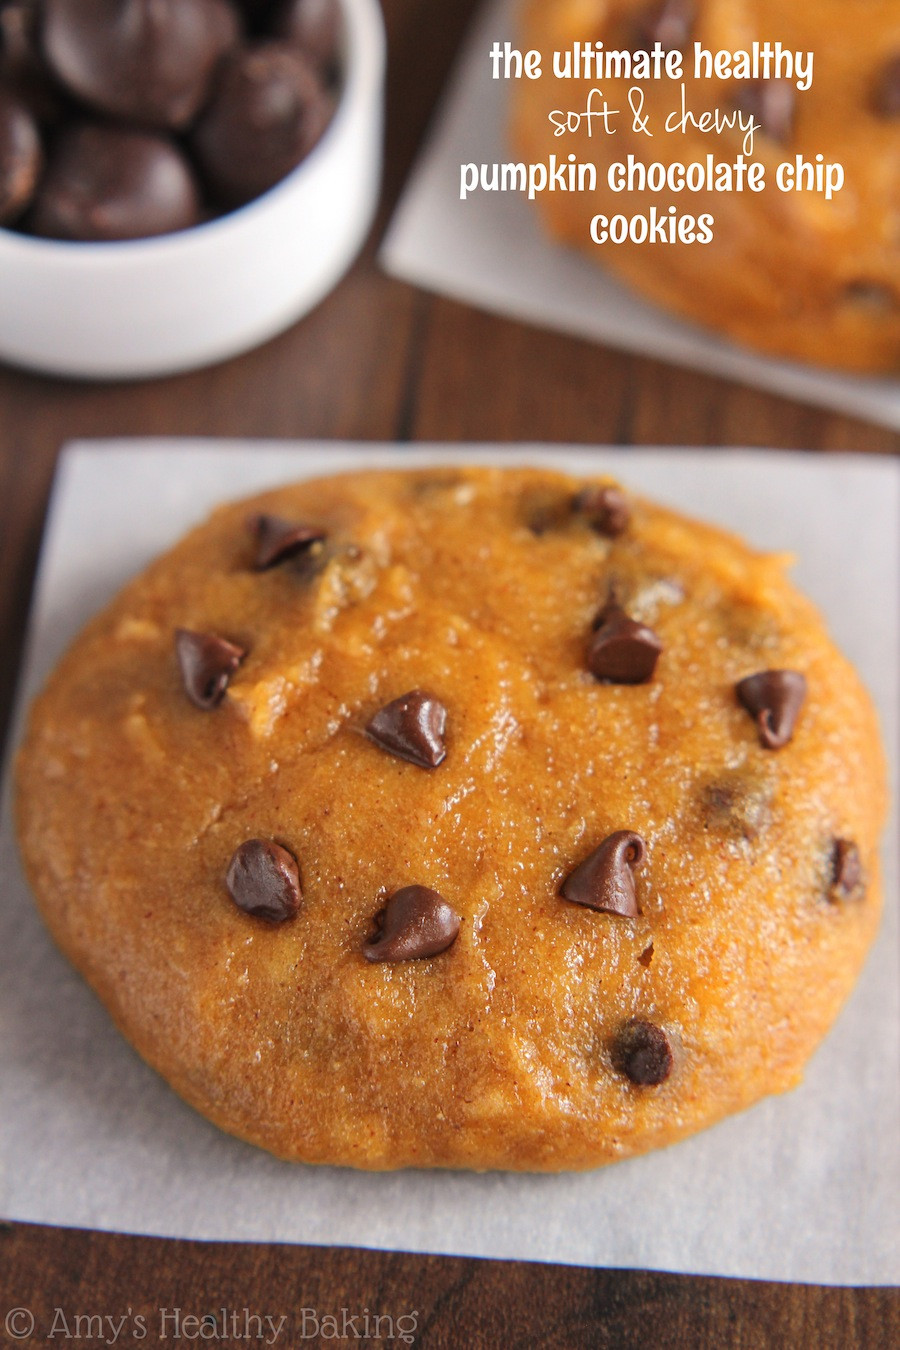 Easy Healthy Pumpkin Cookies
 The Ultimate Healthy Soft & Chewy Pumpkin Chocolate Chip